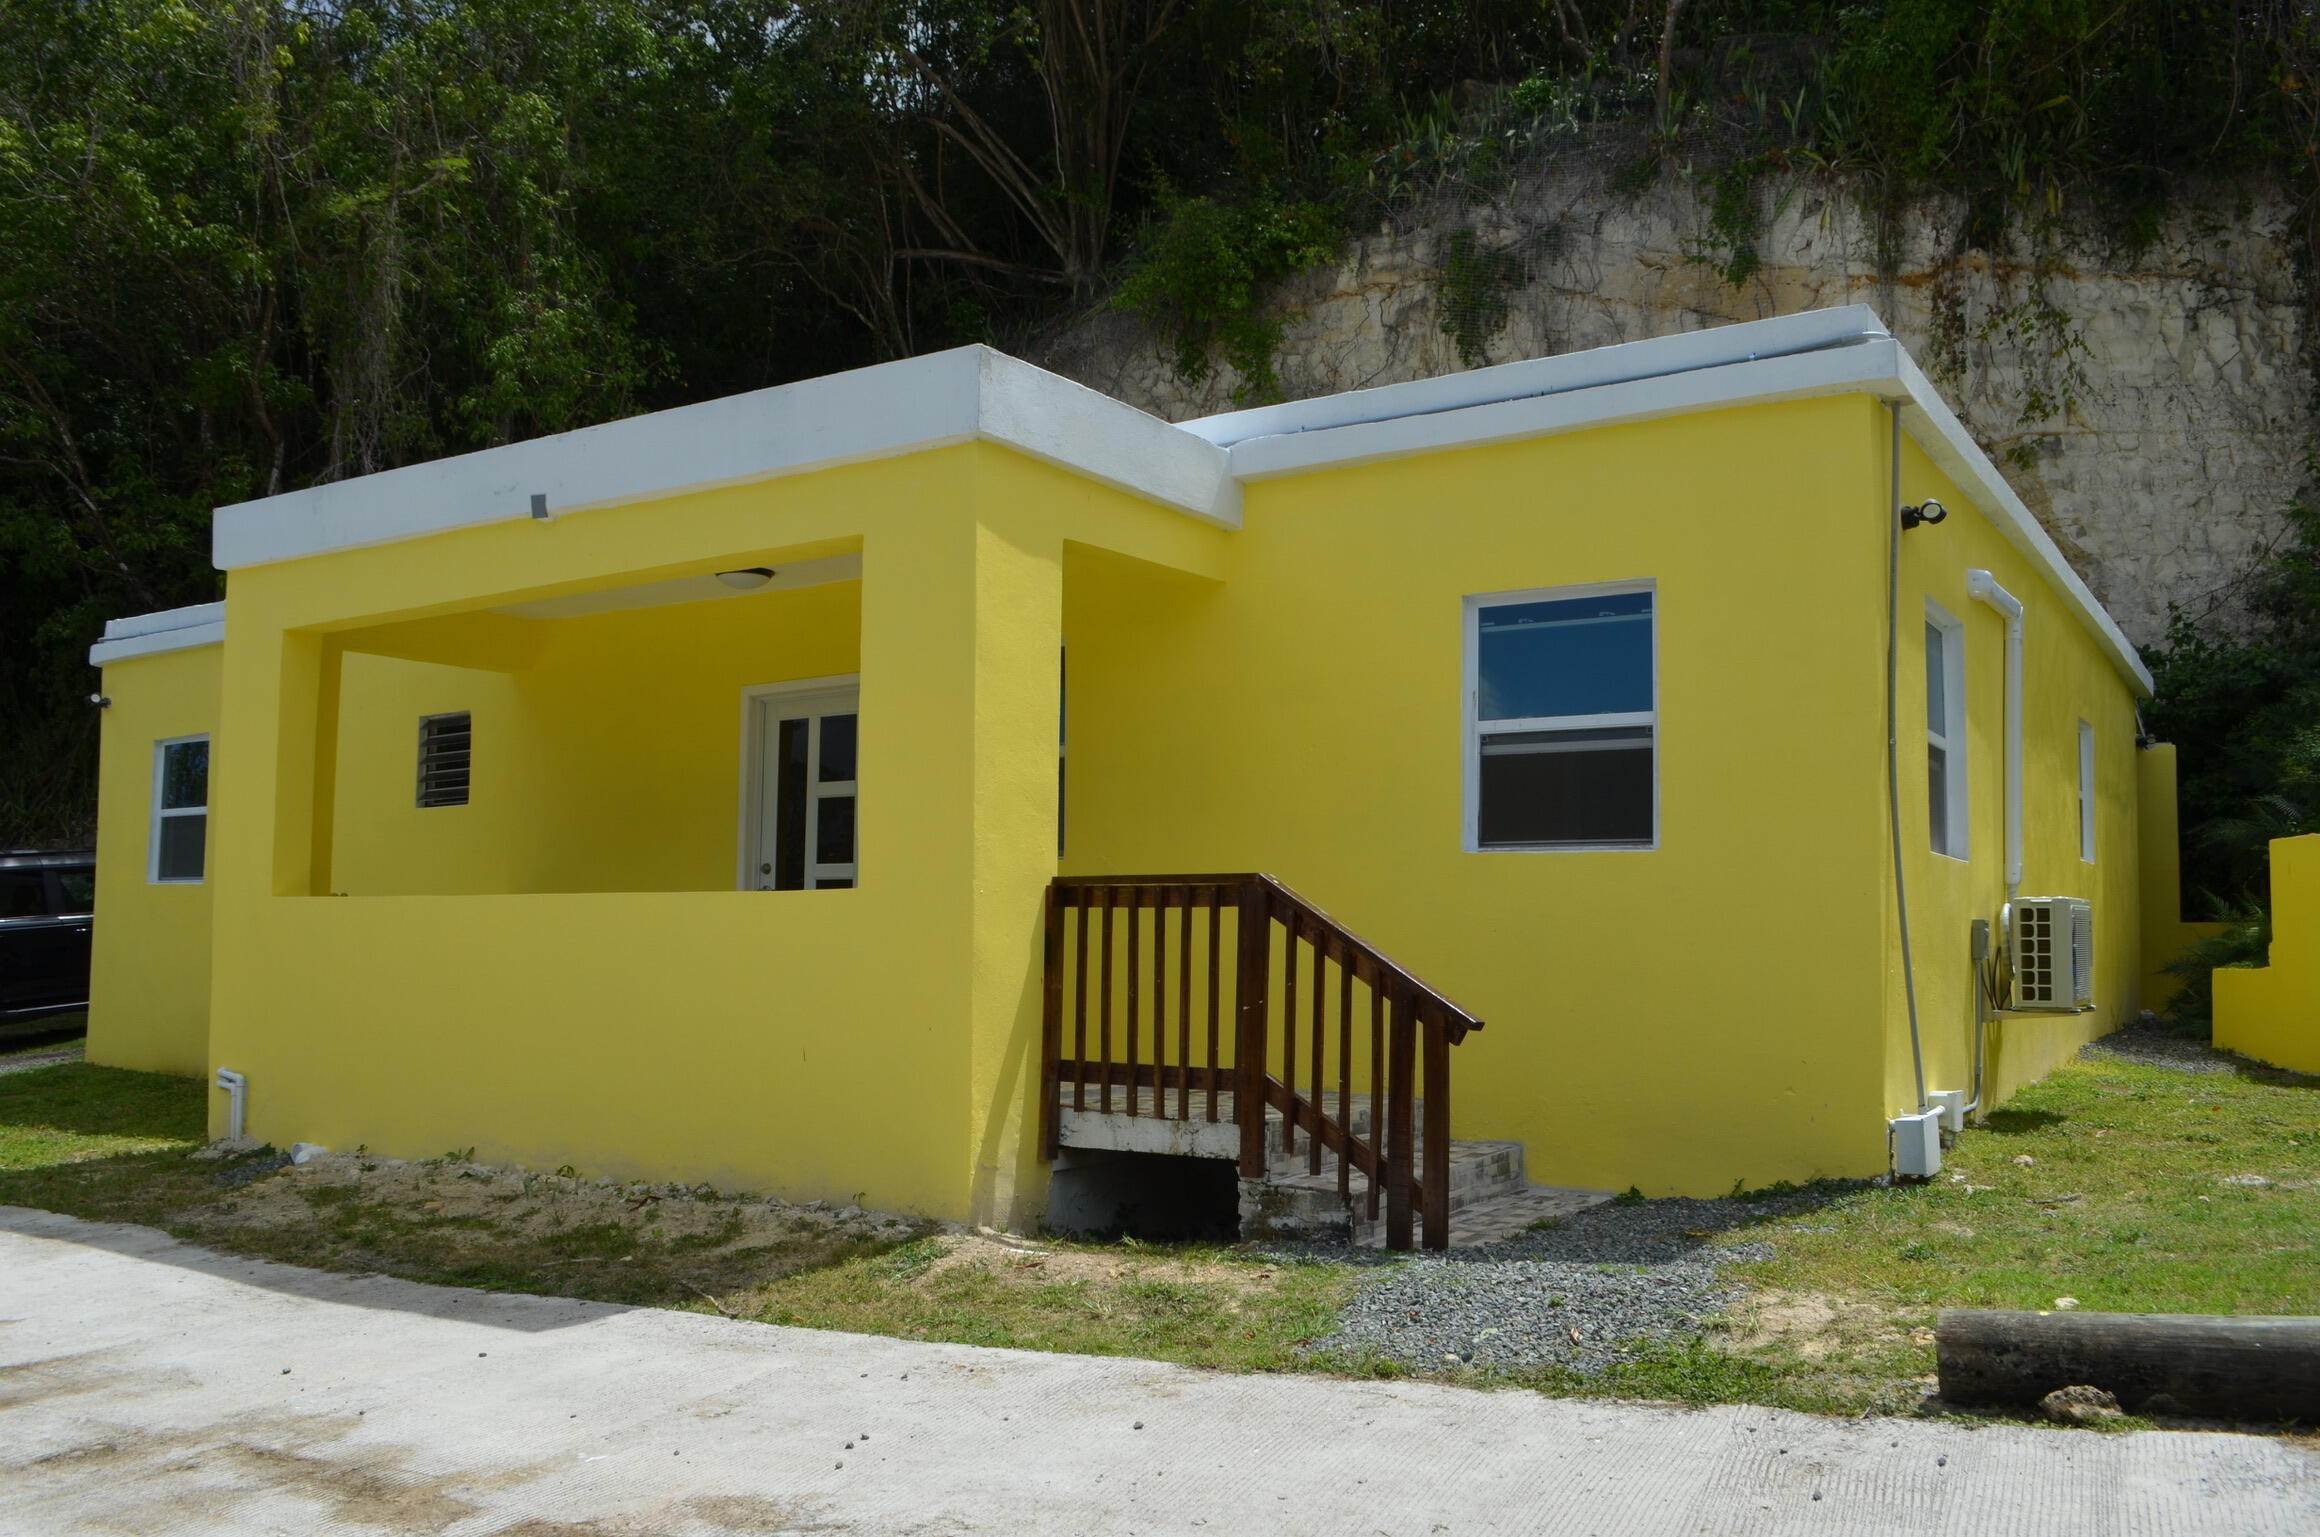 Single Family Homes for Sale at 76-CC Mary's Fancy QU St Croix, Virgin Islands 00820 United States Virgin Islands